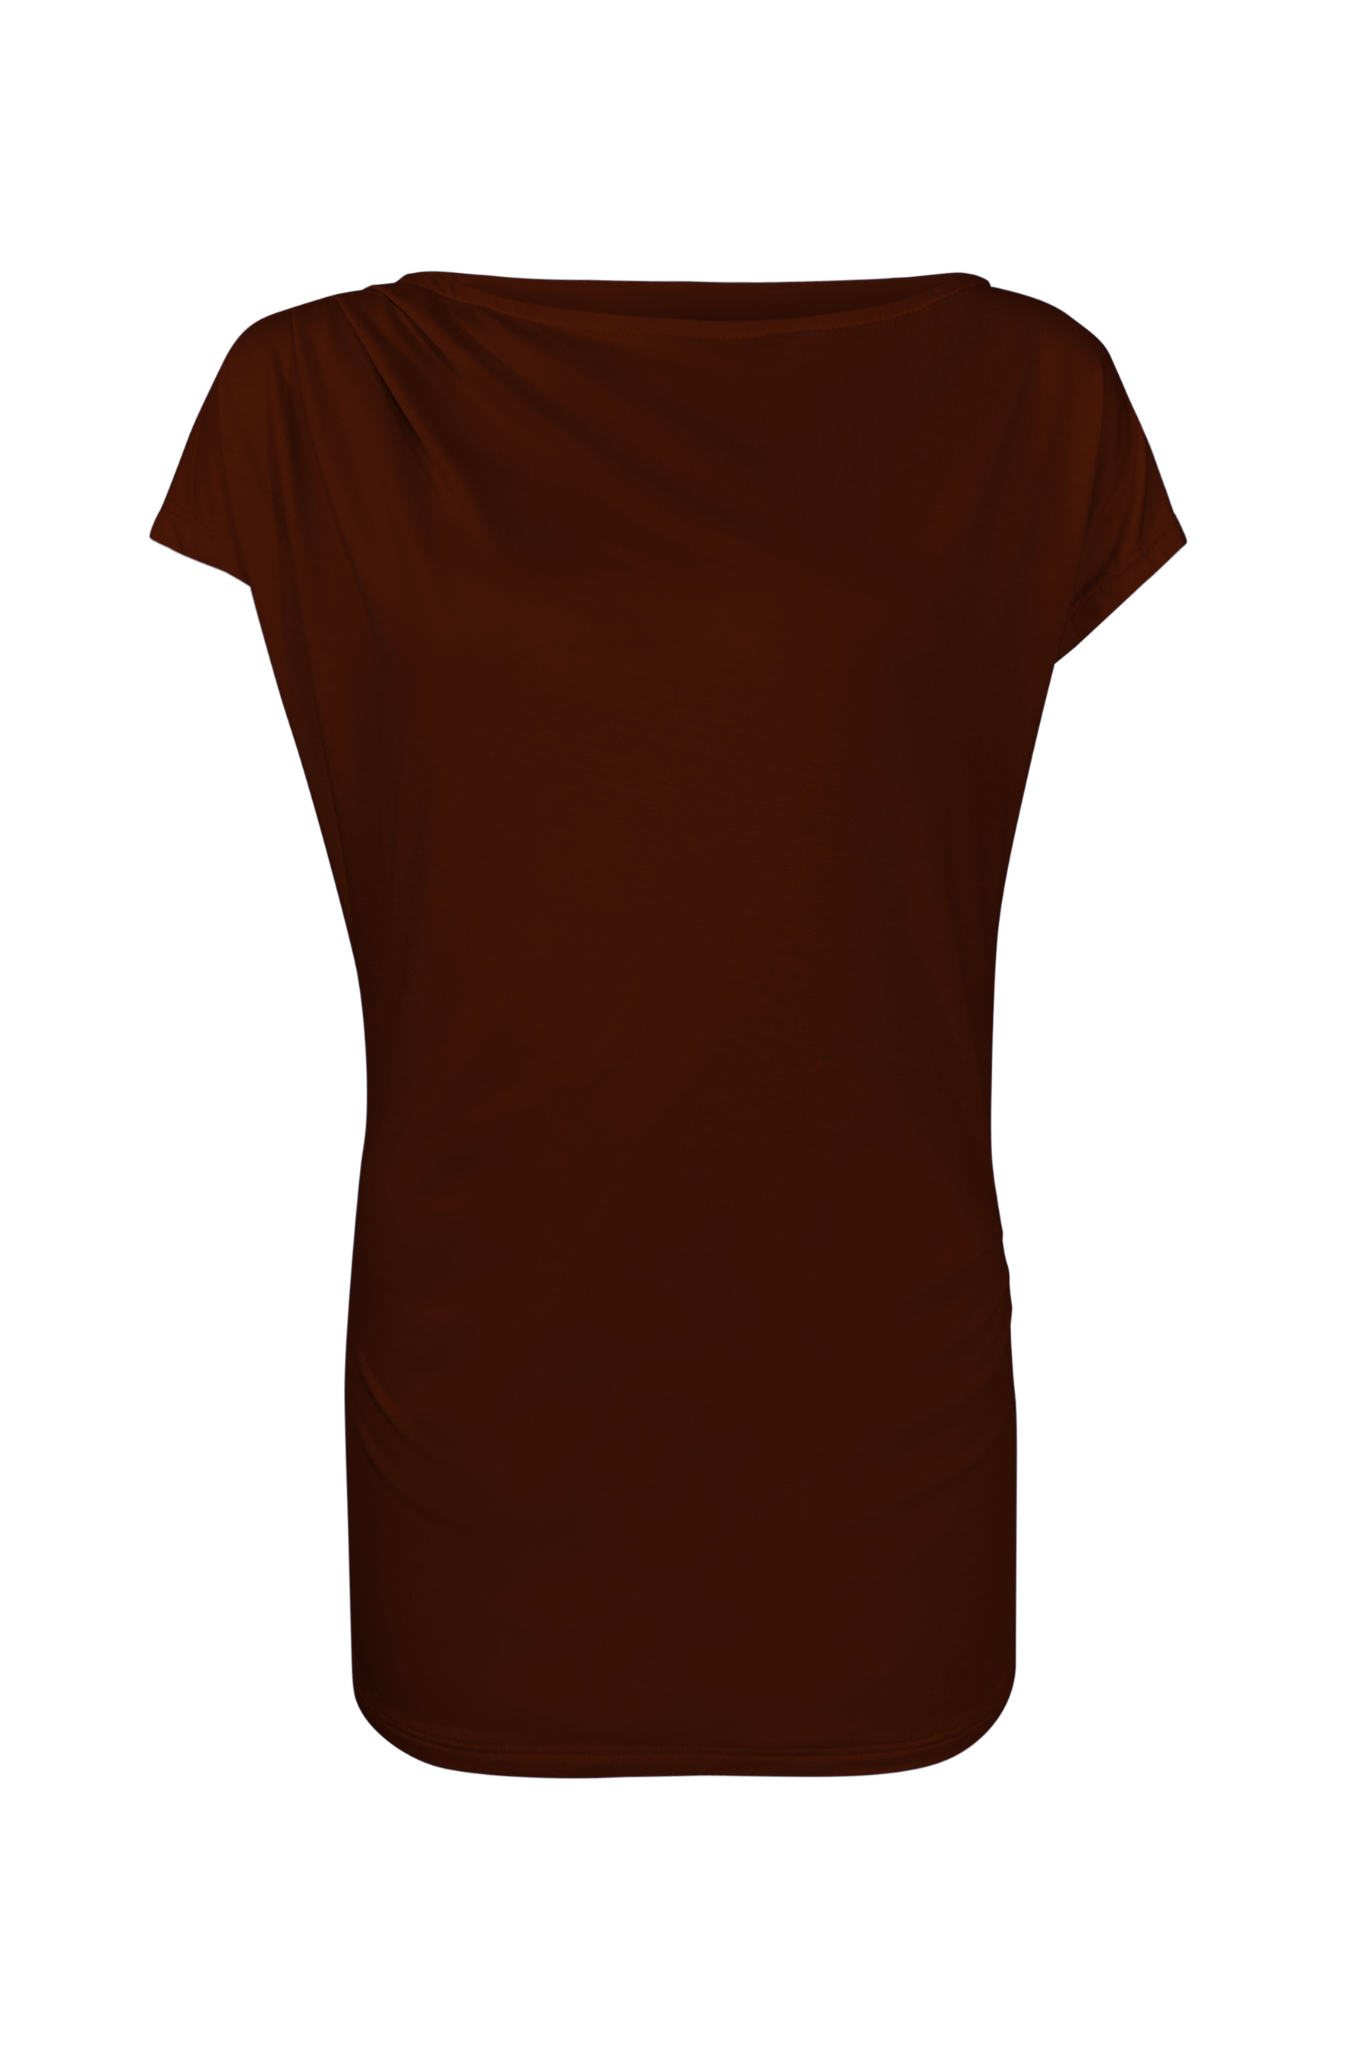 Gentianne Top by Melow, Mahogany, pleats at shoulder and hip, short extended sleeves, hem can be pulled up or down, eco-fabric, bamboo-rayon, OEKO-TEX certified, sizes XS to L, made in Montreal